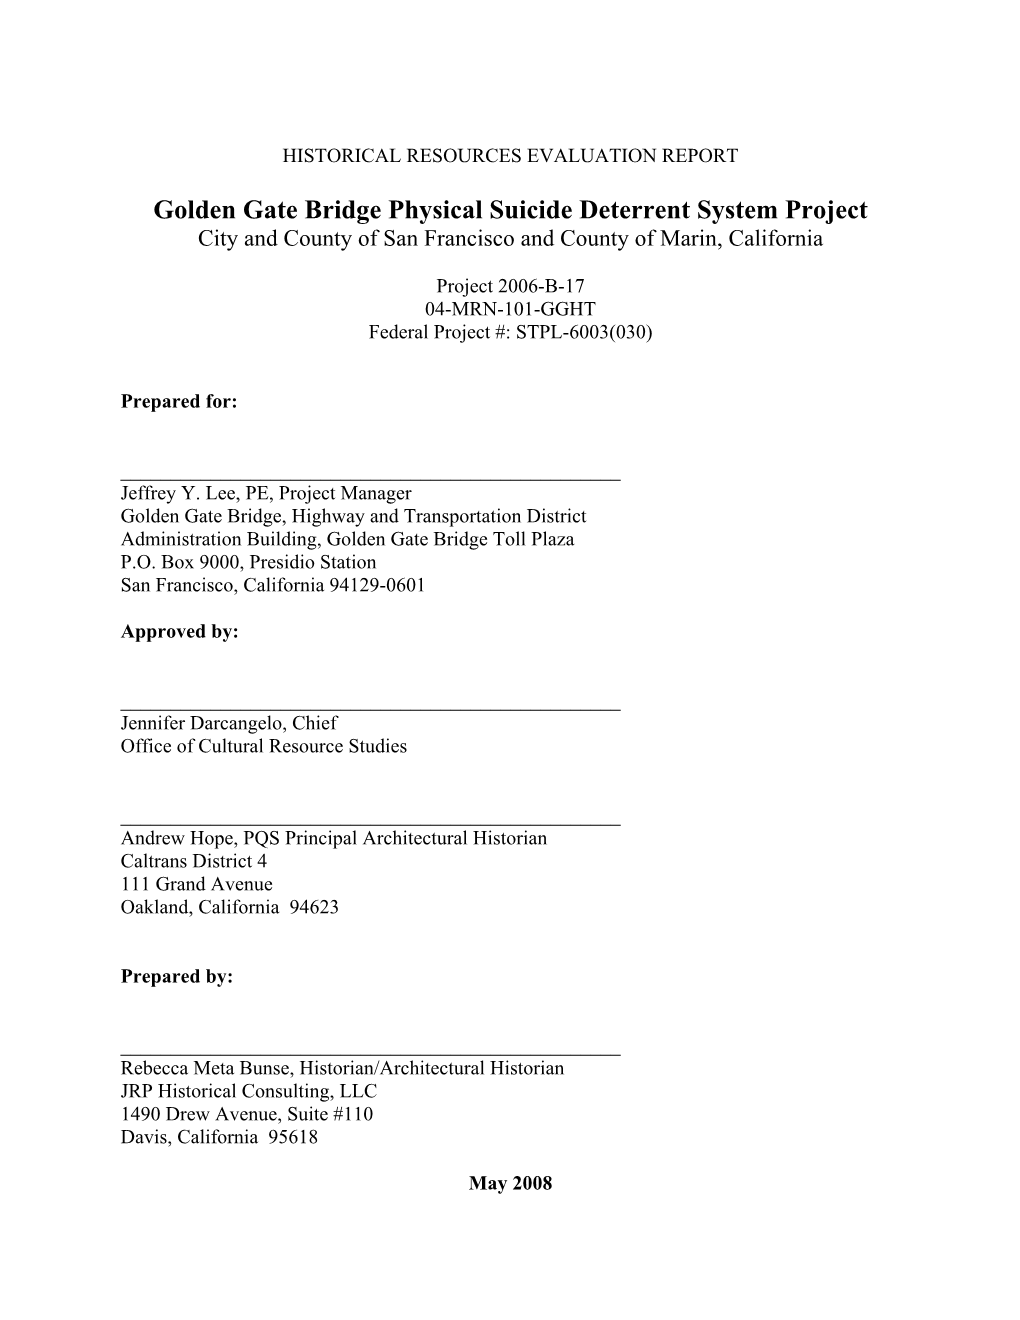 Golden Gate Bridge Physical Suicide Deterrent System Project City and County of San Francisco and County of Marin, California